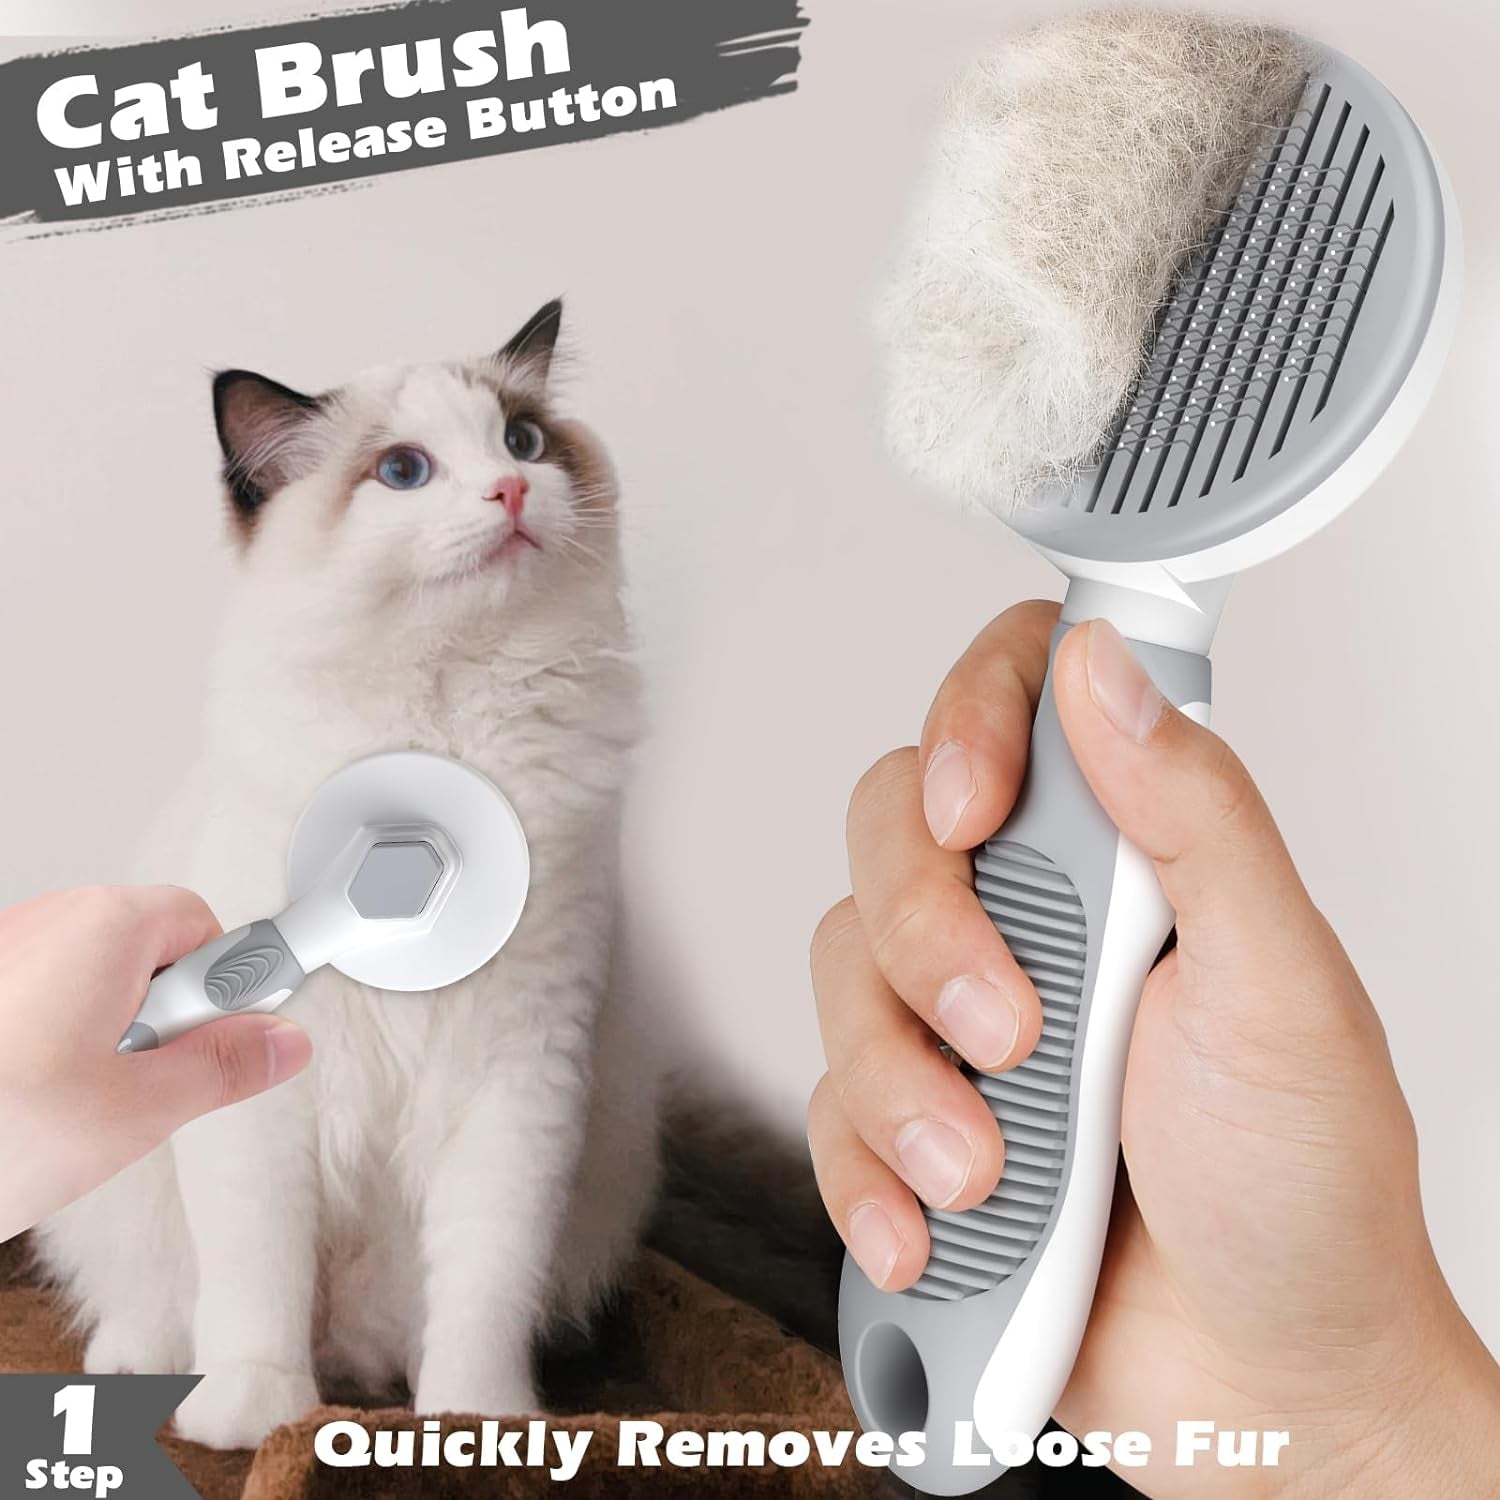 4PCS Cat Grooming Kit: Brushes, Nail Clipper, Bath Brush - Premium Supplies for Cats & Dogs